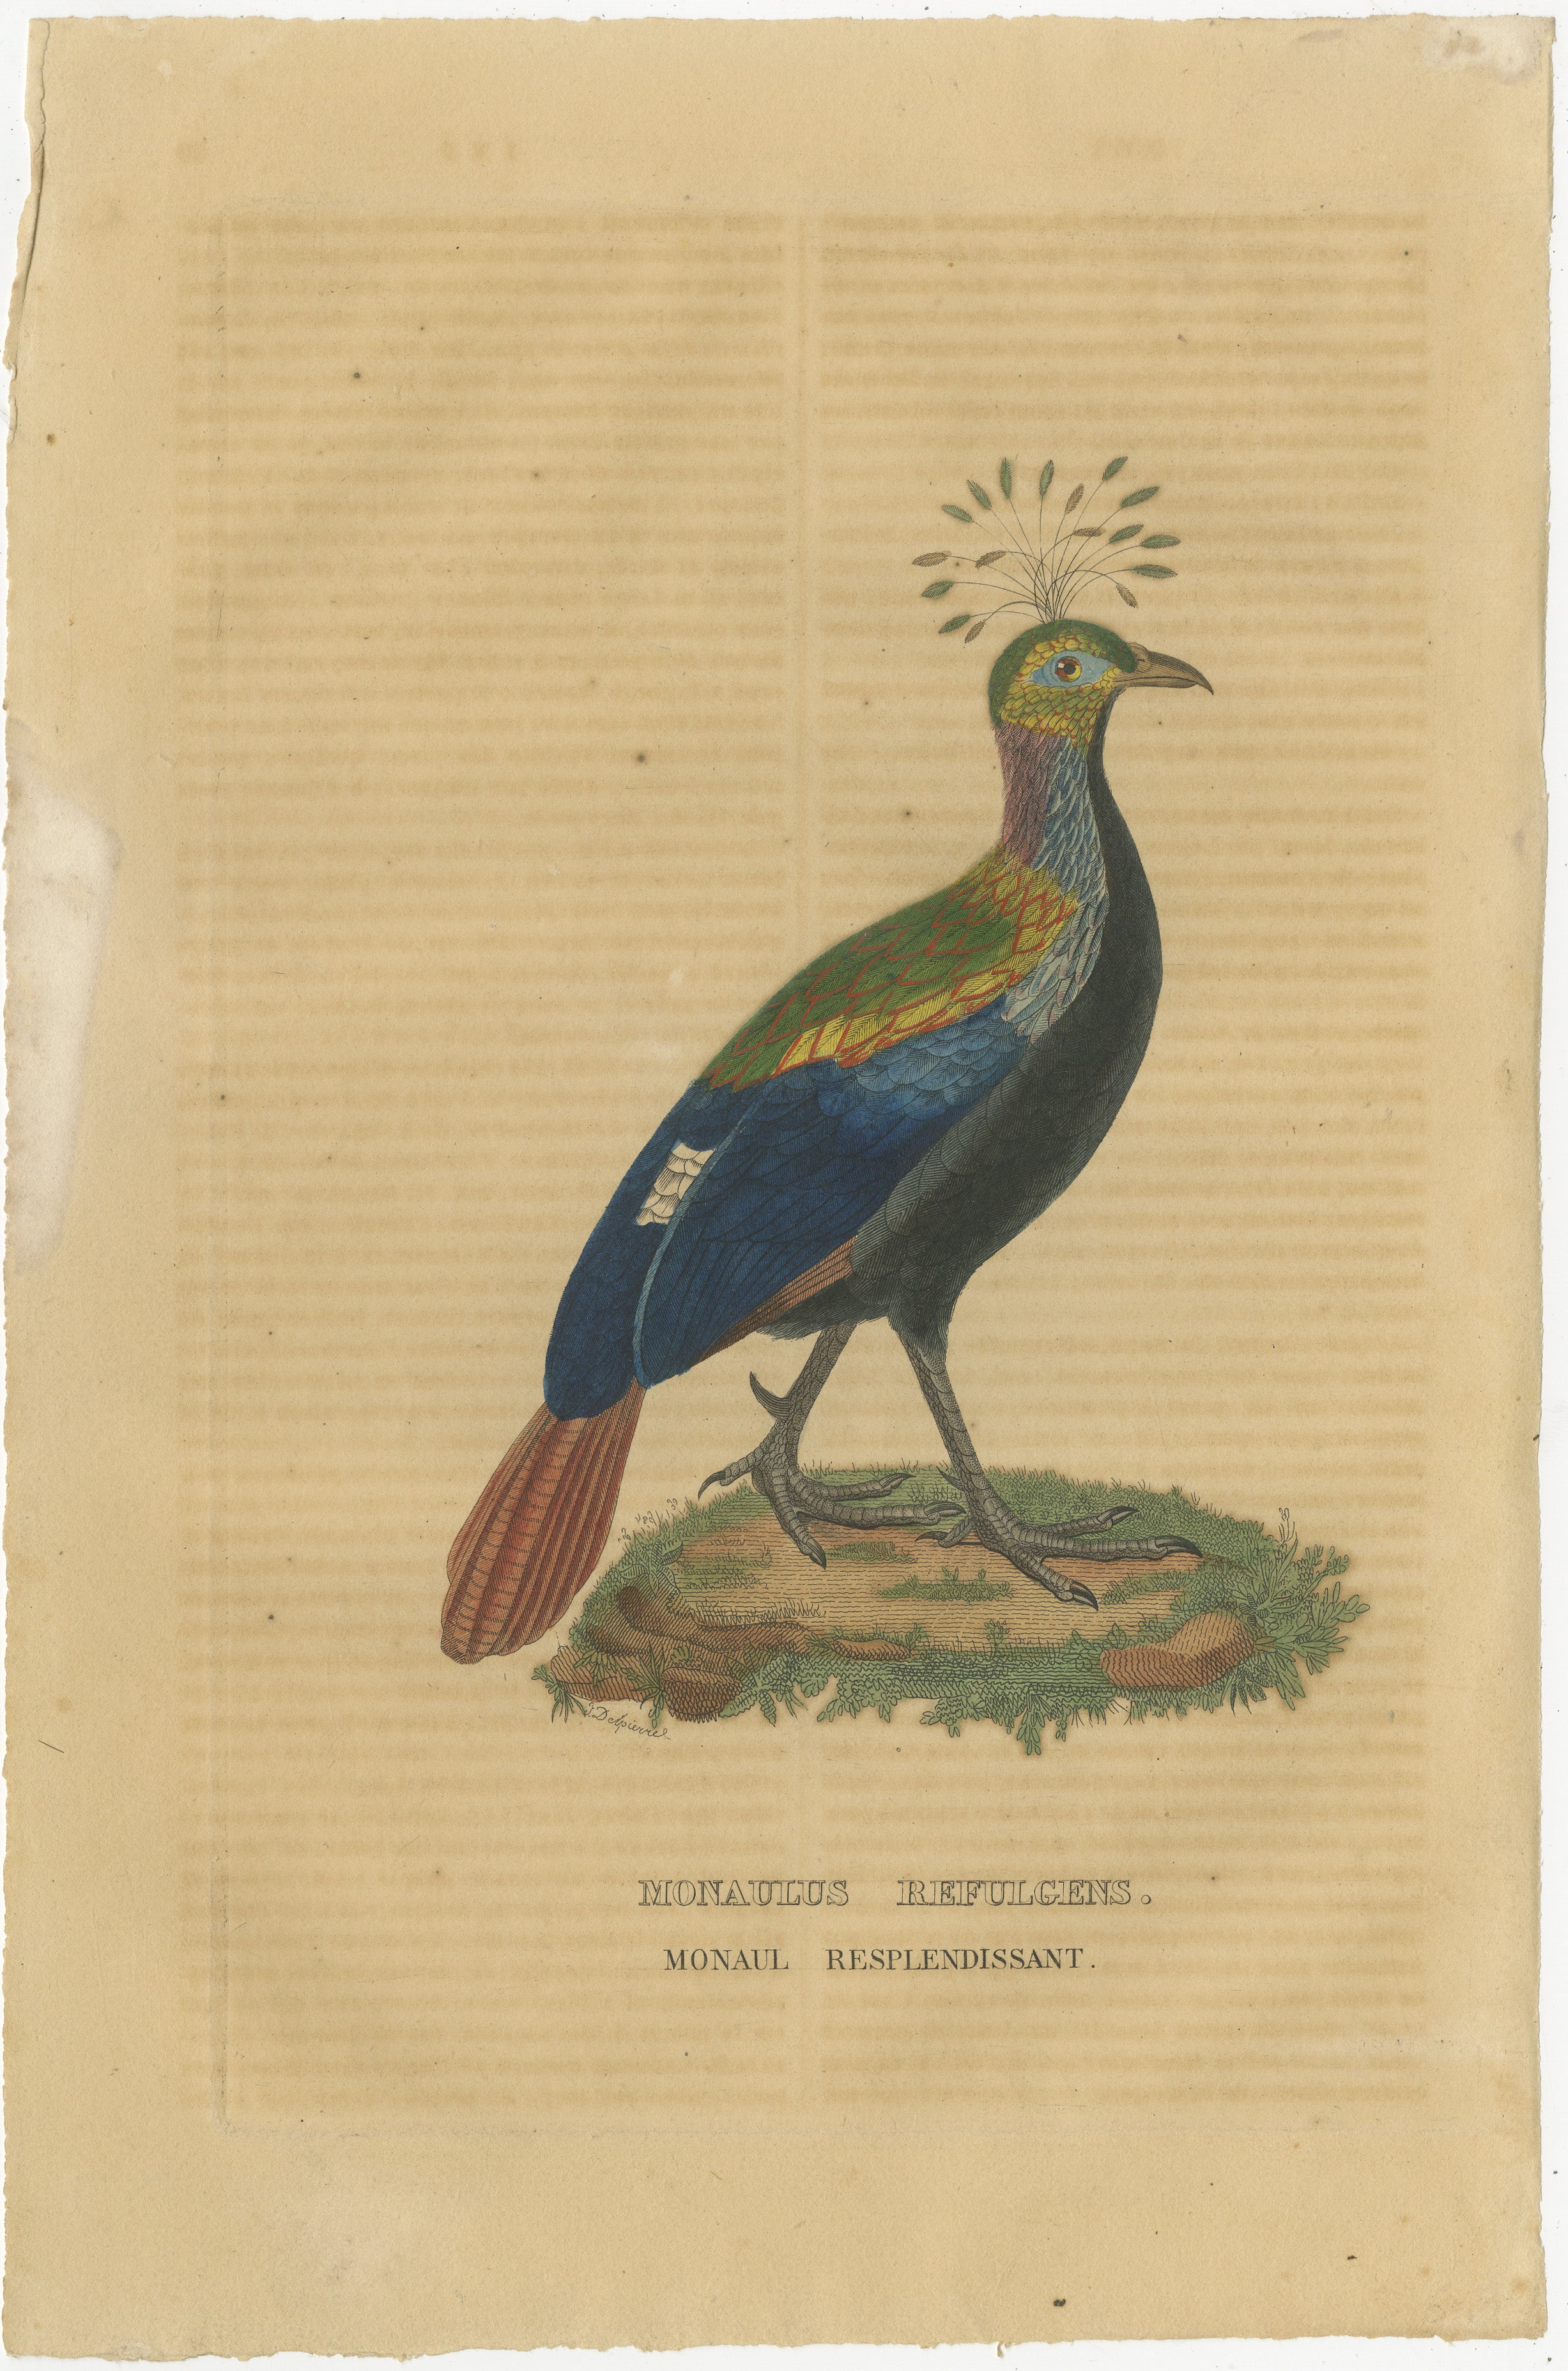 Title: ‘MONAULUS REFULGENS – MONAUL RESPLENDISSANT.’
– (Himalayan Monal, Impeyan Monal, Impeyan Pheasant, DanpheIt is the National bird of Nepal.)

Engraving with original hand colouring, heightened with arabic gum on wove (vellin) paper.

The